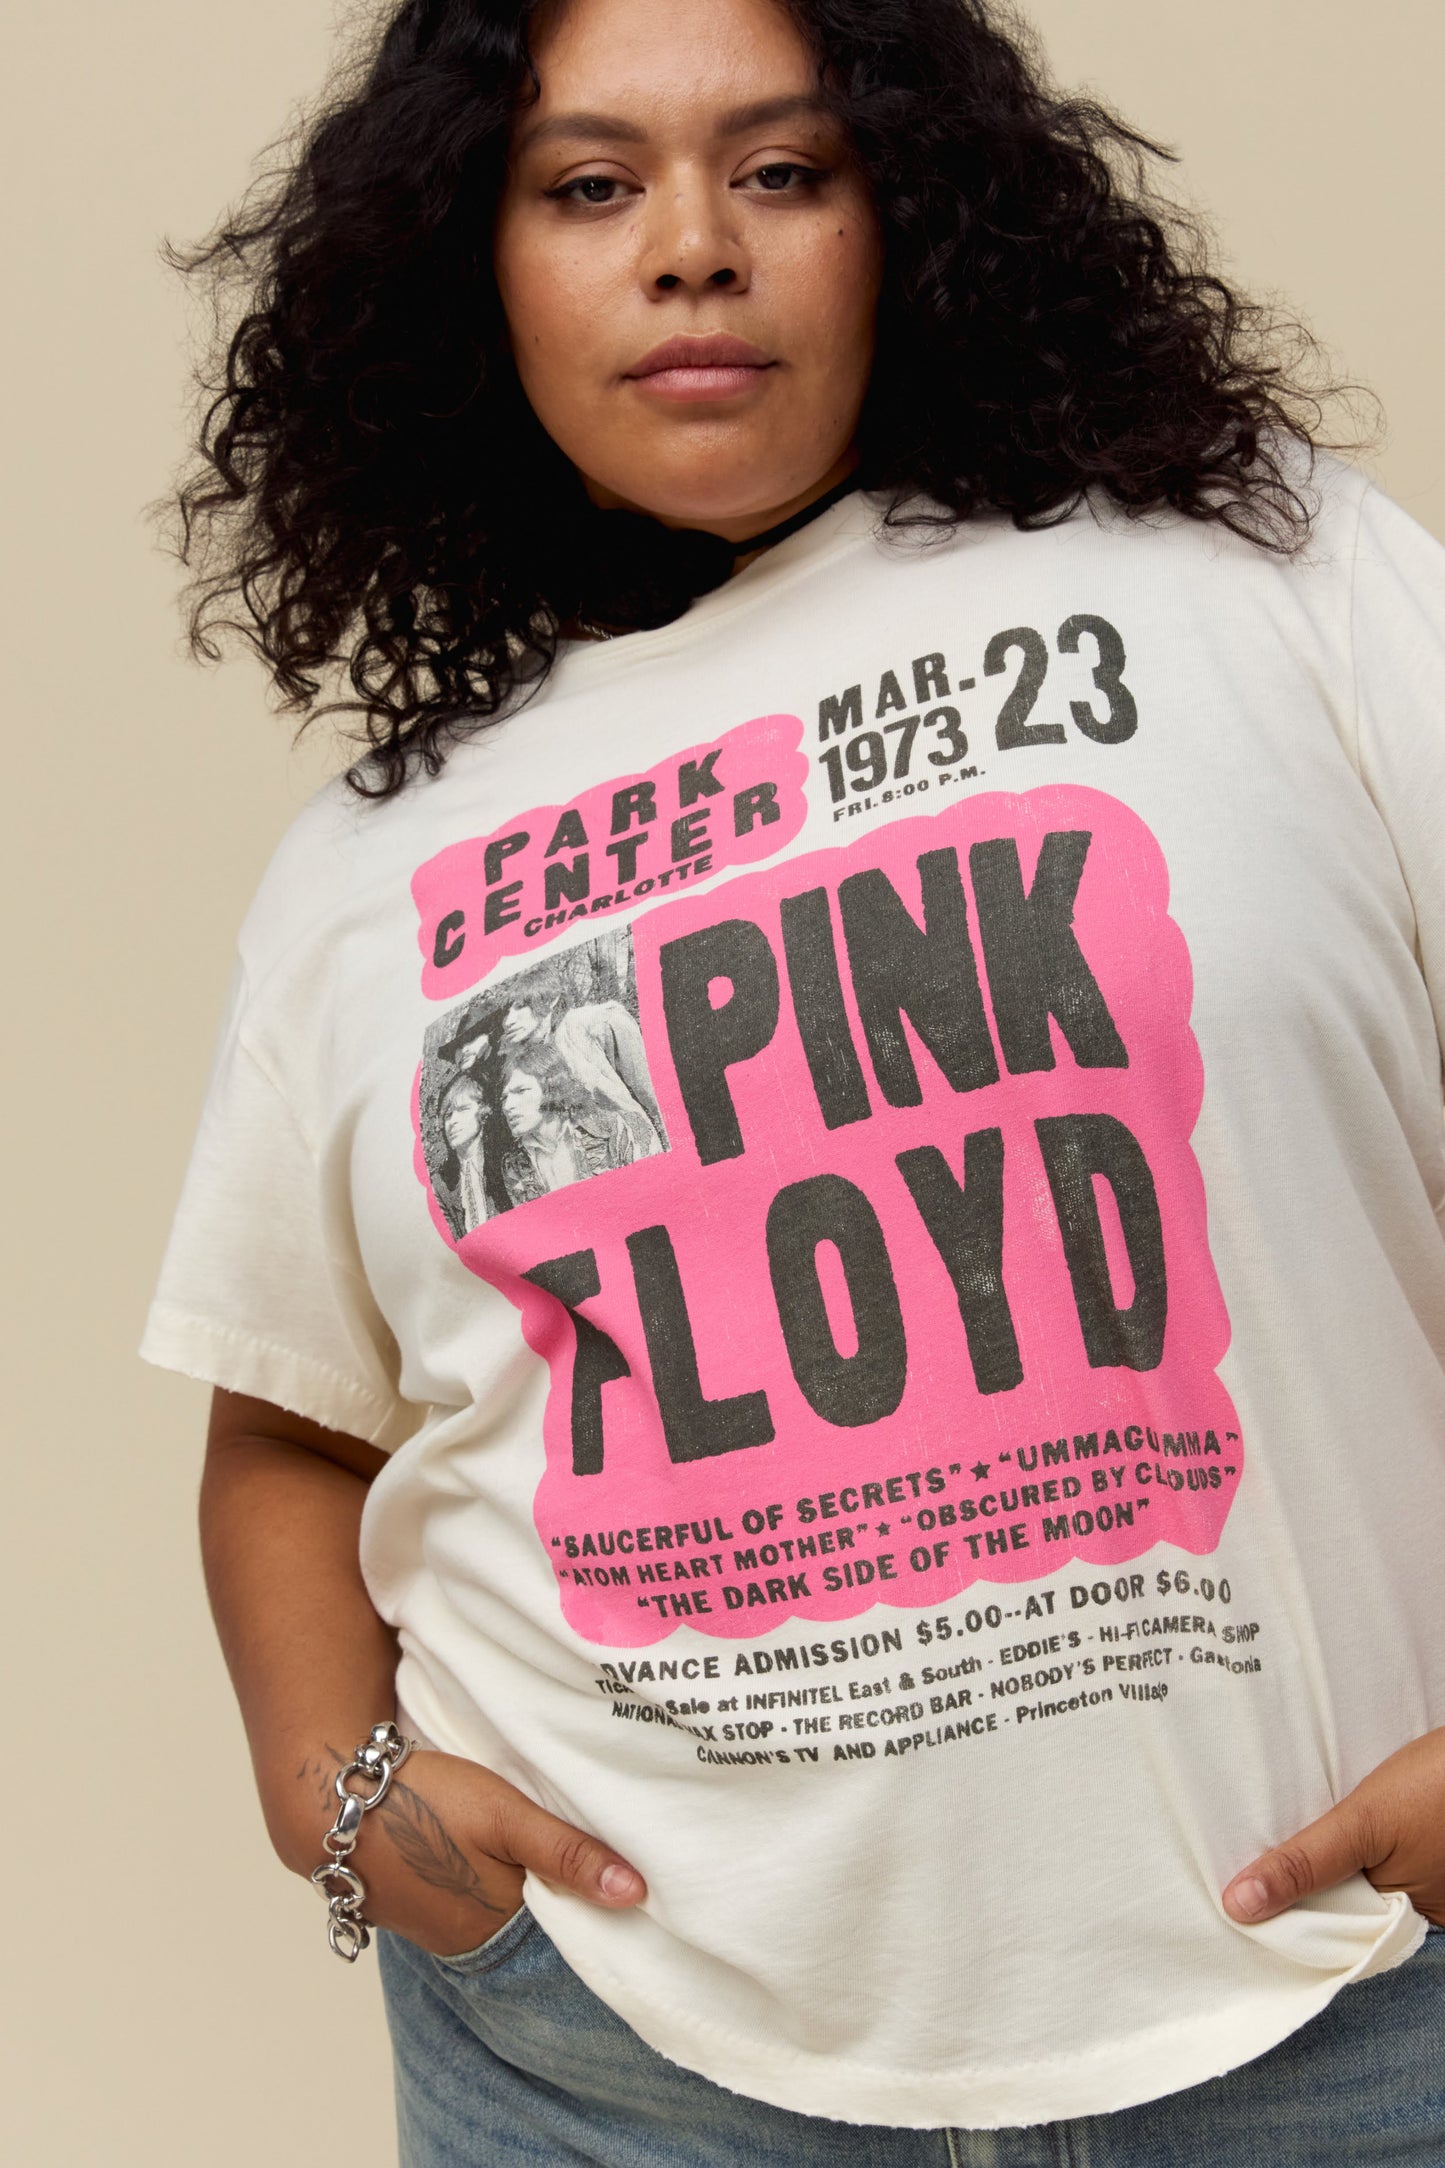 A model featuring a white tee es designed as a true show flyer for Pink Floyd's 1973 Park Center set.